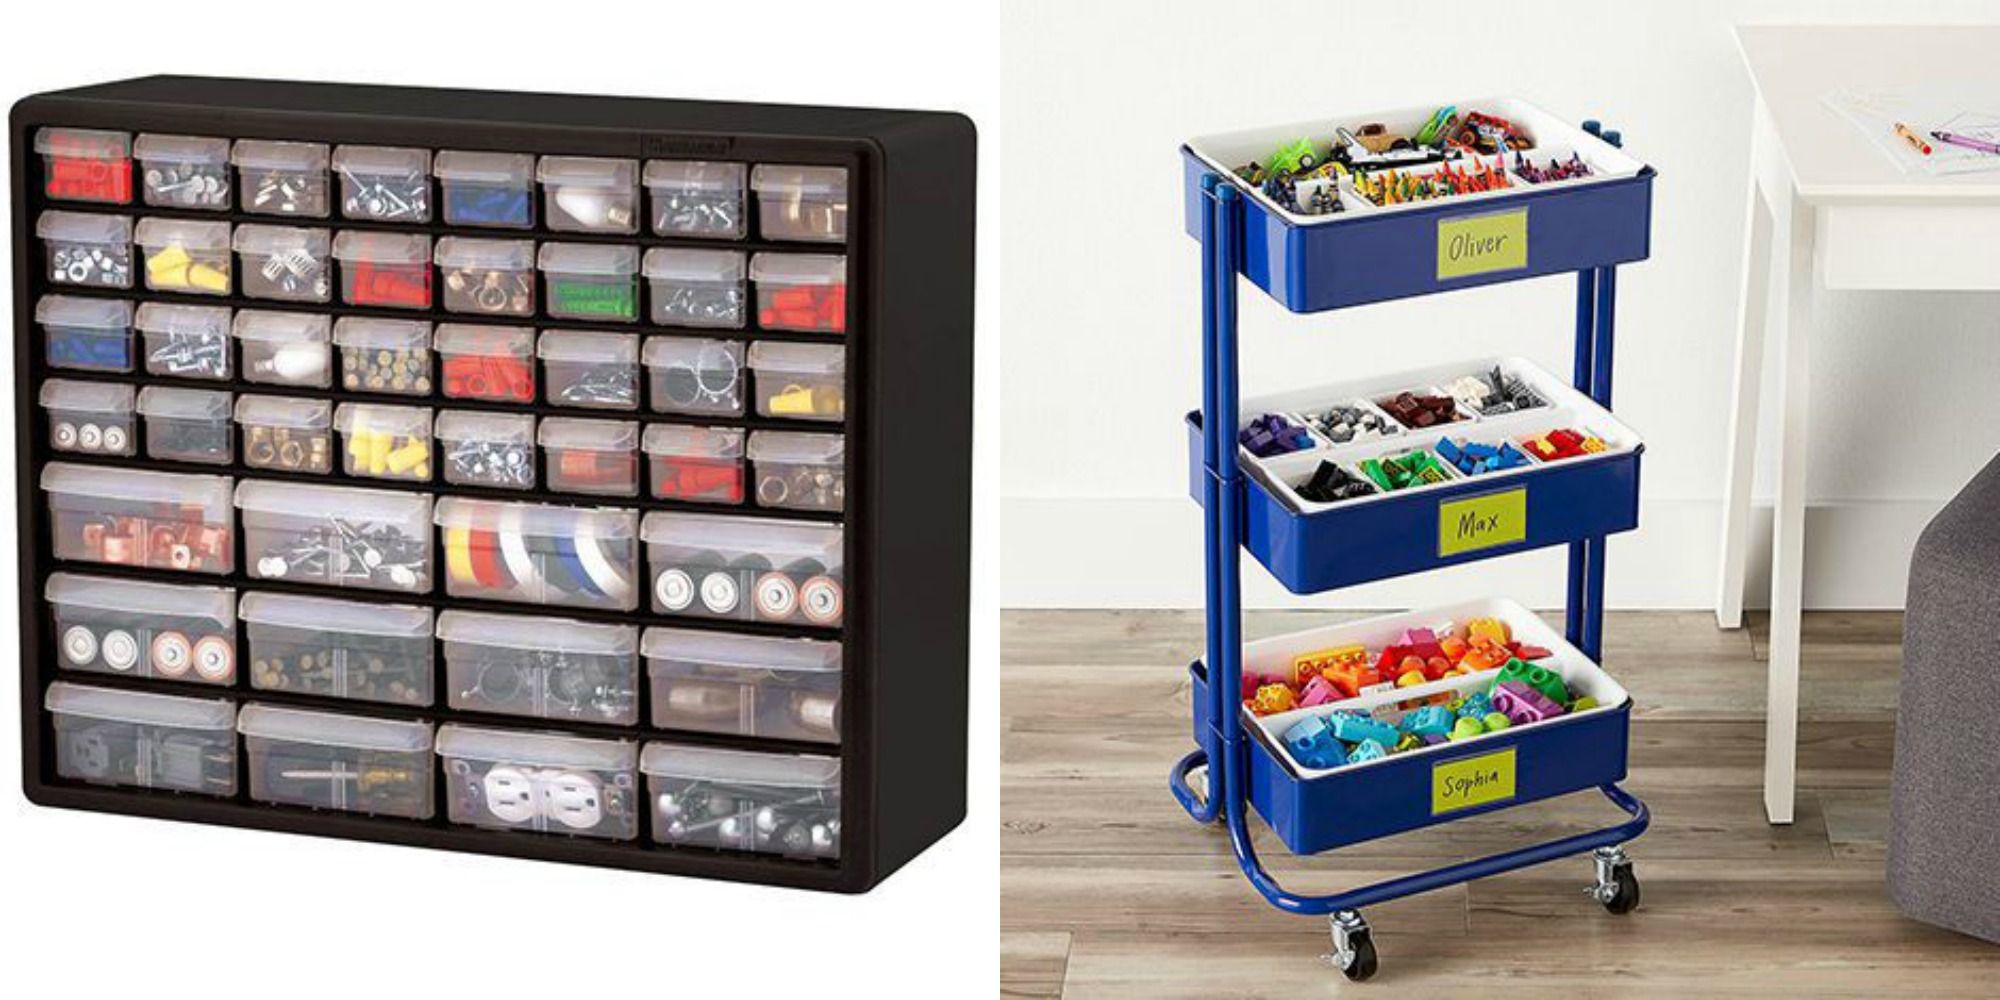 6 Clever Lego Storage Ideas - Get Those Pieces Sorted!